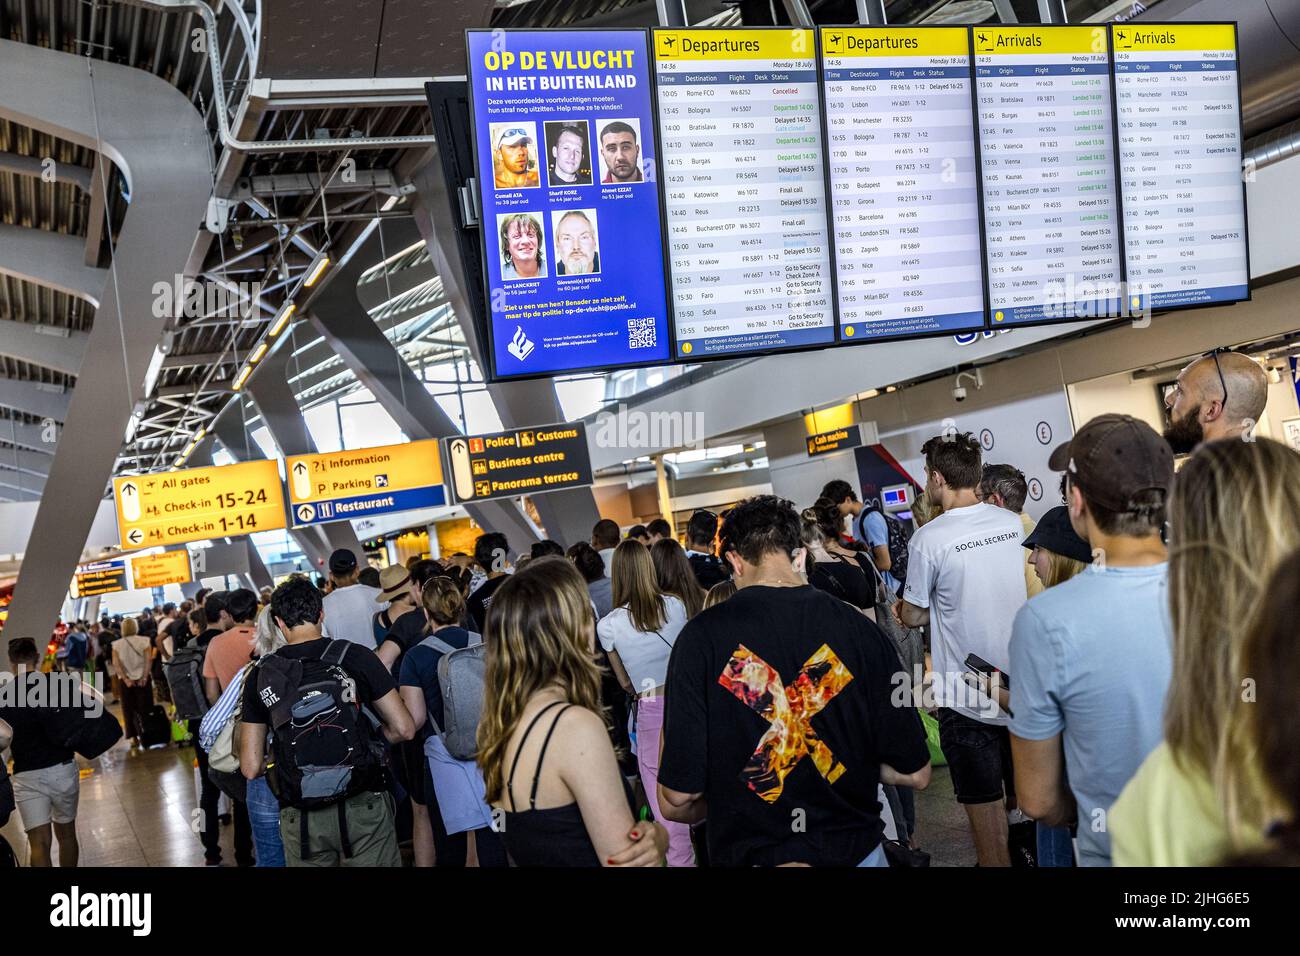 2022-07-18 15:27:22 EINDHOVEN - A search message on a departure times screen in the terminal of Eindhoven Airport. Travelers are shown photos of eight fugitive convicts in the departure halls of Schiphol, Eindhoven Airport and Rotterdam The Hague Airport. ANP ROB ENGELAAR netherlands out - belgium out Stock Photo